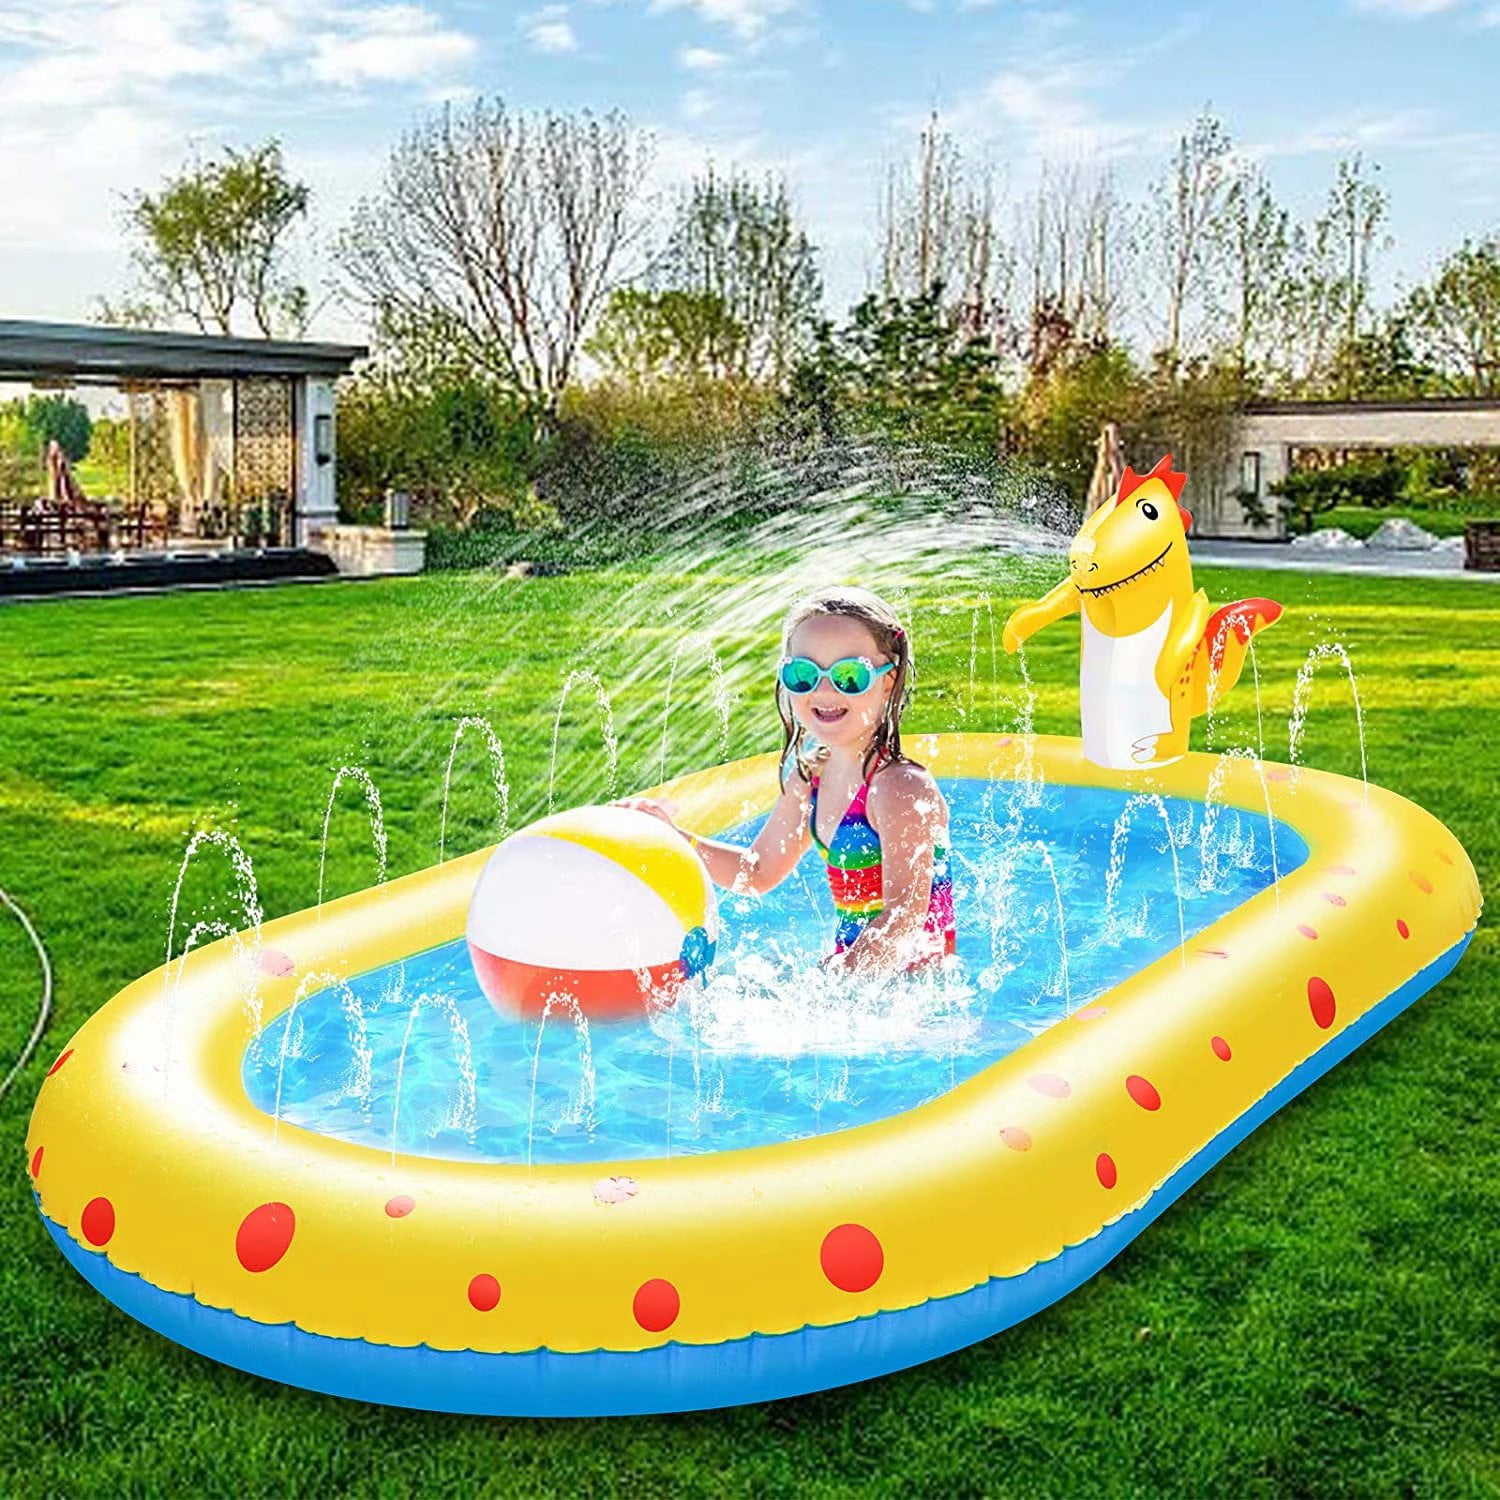 Baby Pool,Shark Splash Toddlers Swimming Pool with Canopy,Portable Inflatable Kiddie Paddling Pool with Water Sprinkler,45’’ Indoor&Outdoor Water Game Play Center for Kids 